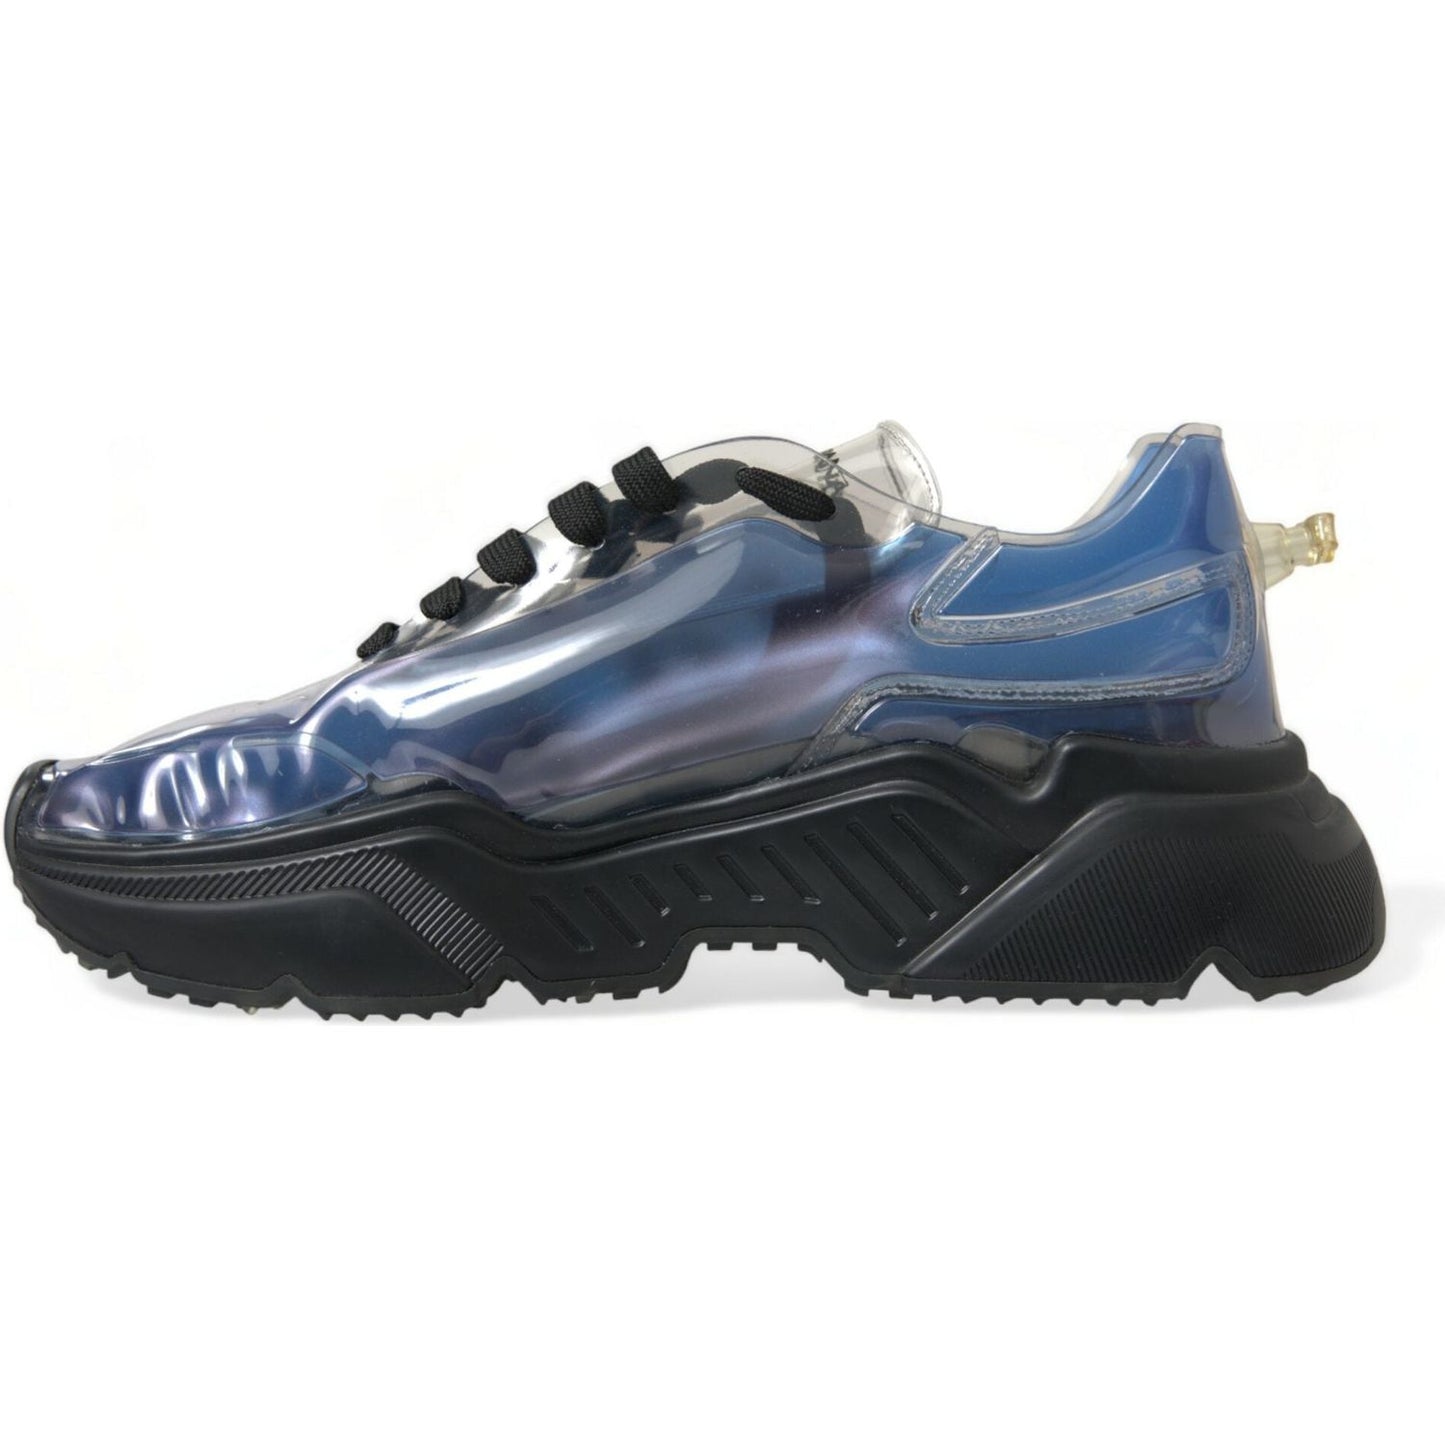 Dolce & Gabbana Elevate Your Style with Chic Blue Sneakers elevate-your-style-with-chic-blue-sneakers